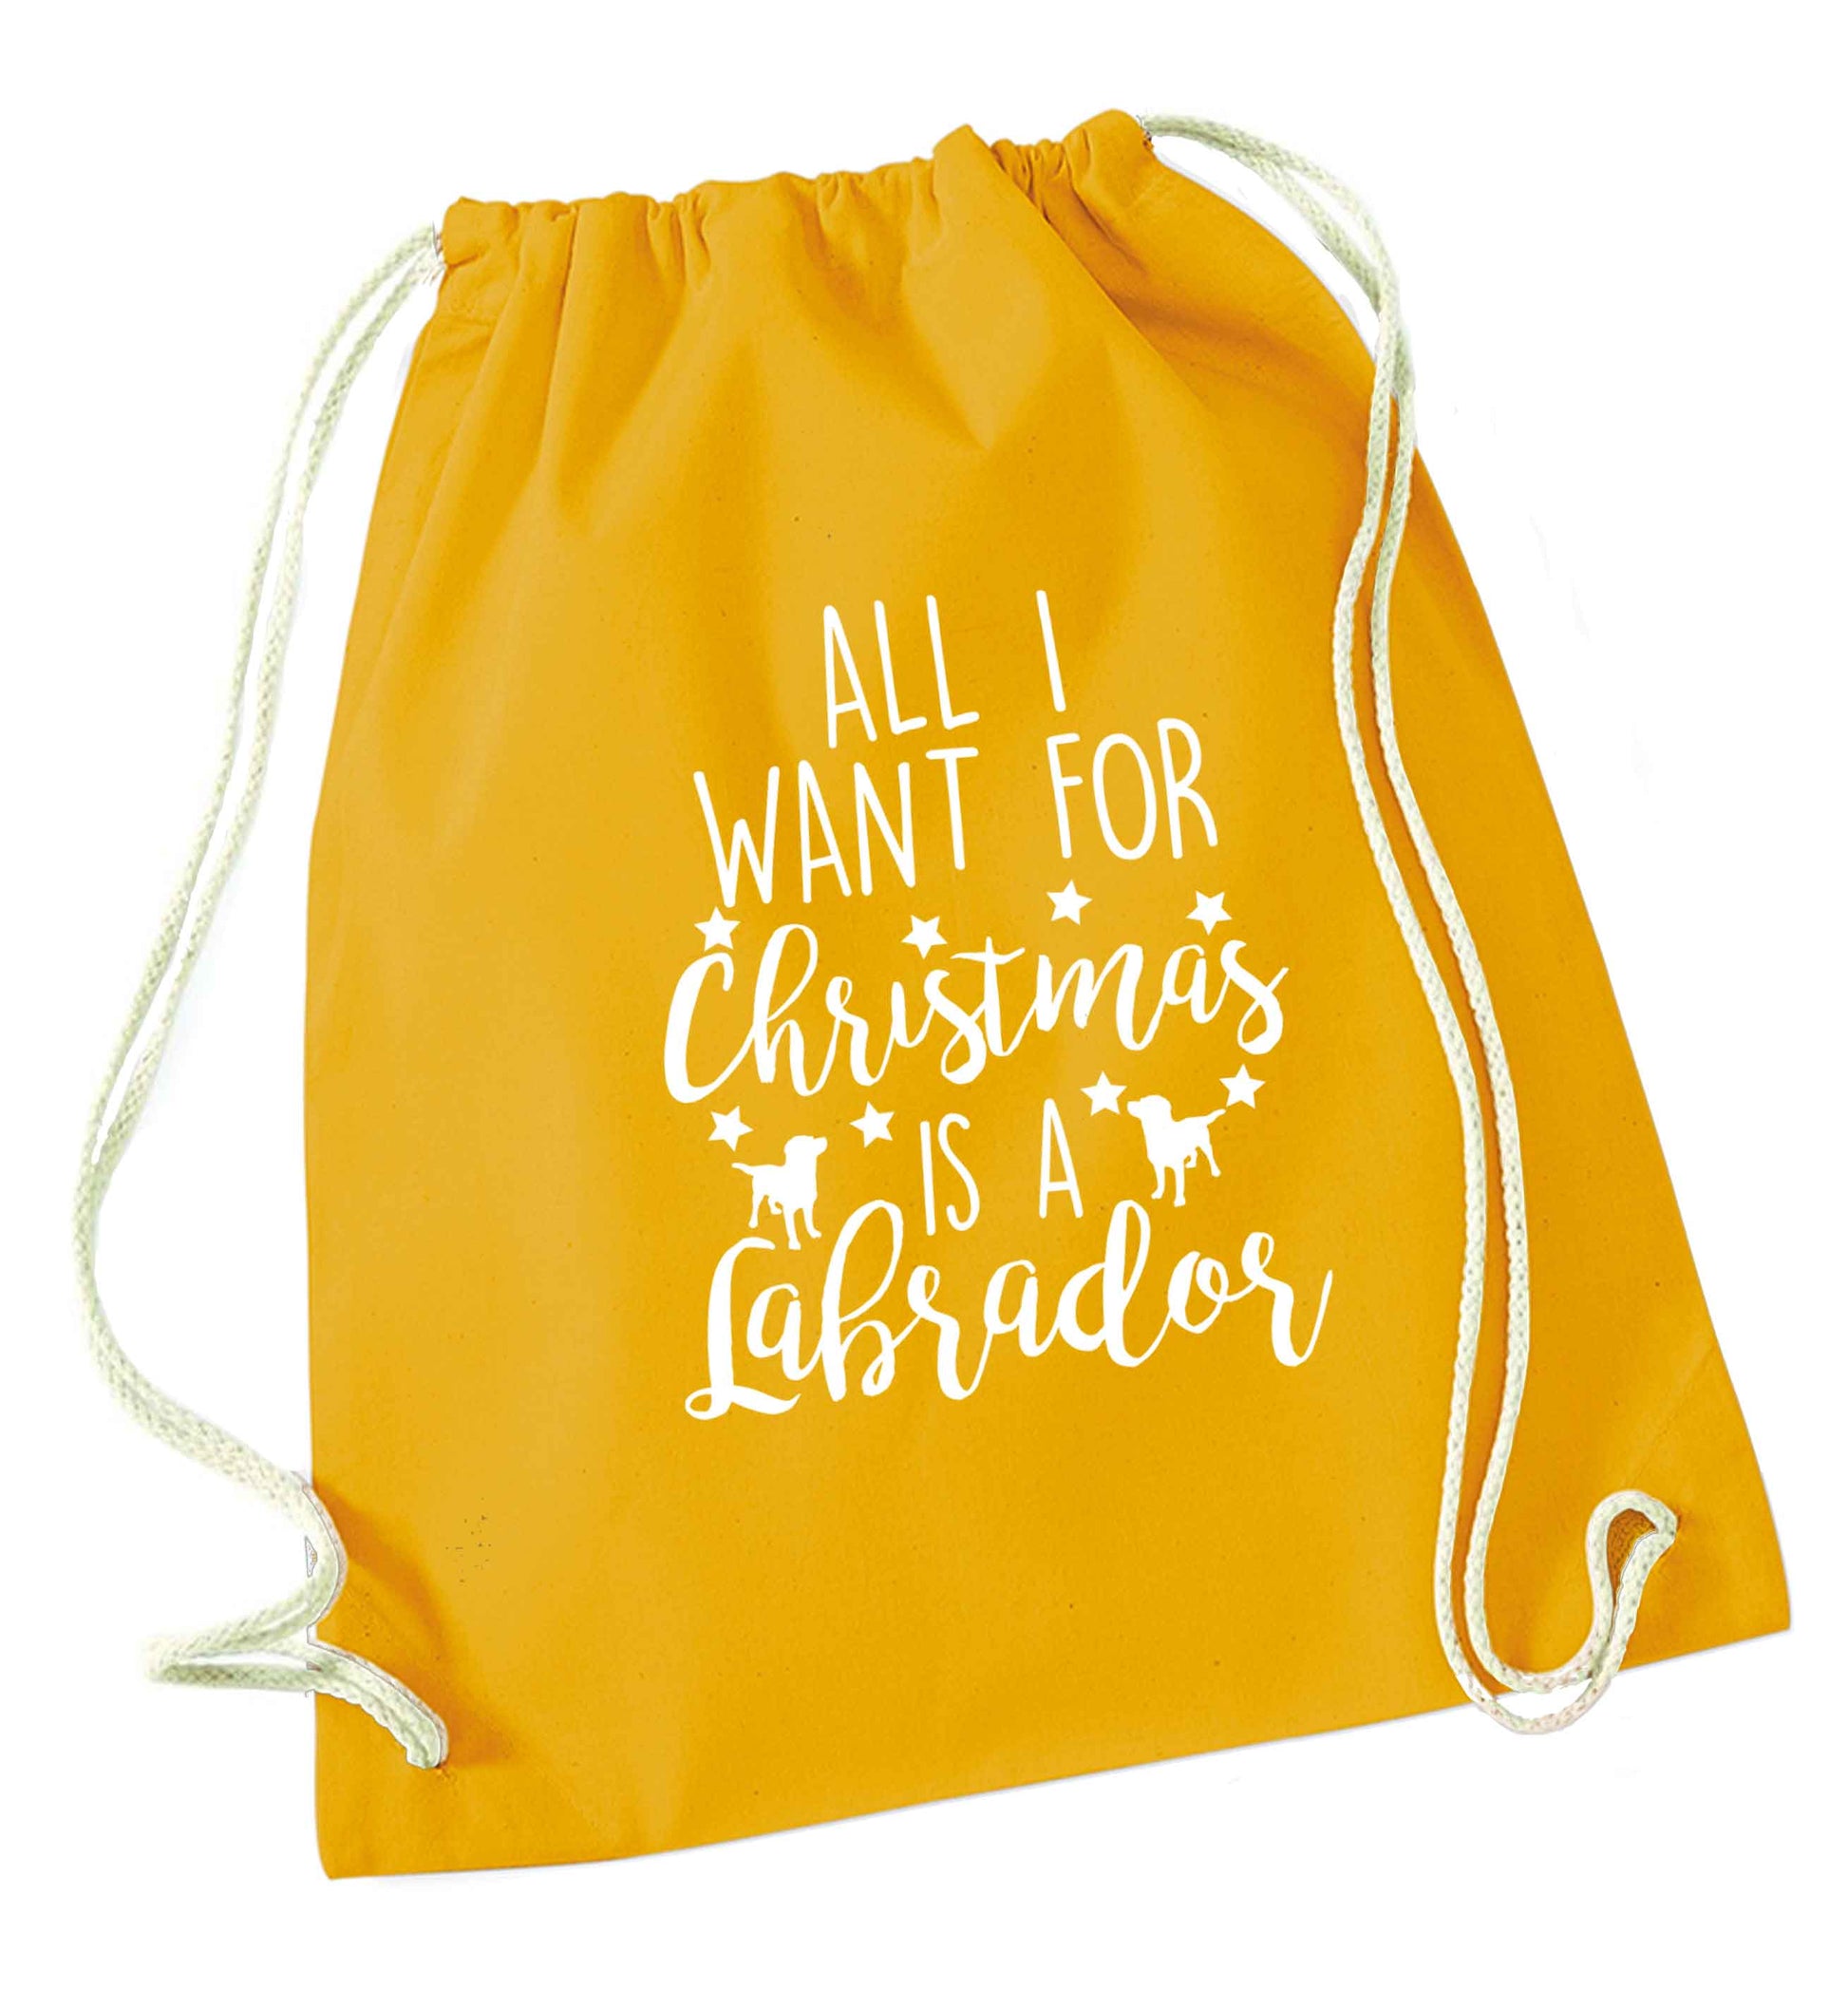 All I want for Christmas is a labrador mustard drawstring bag